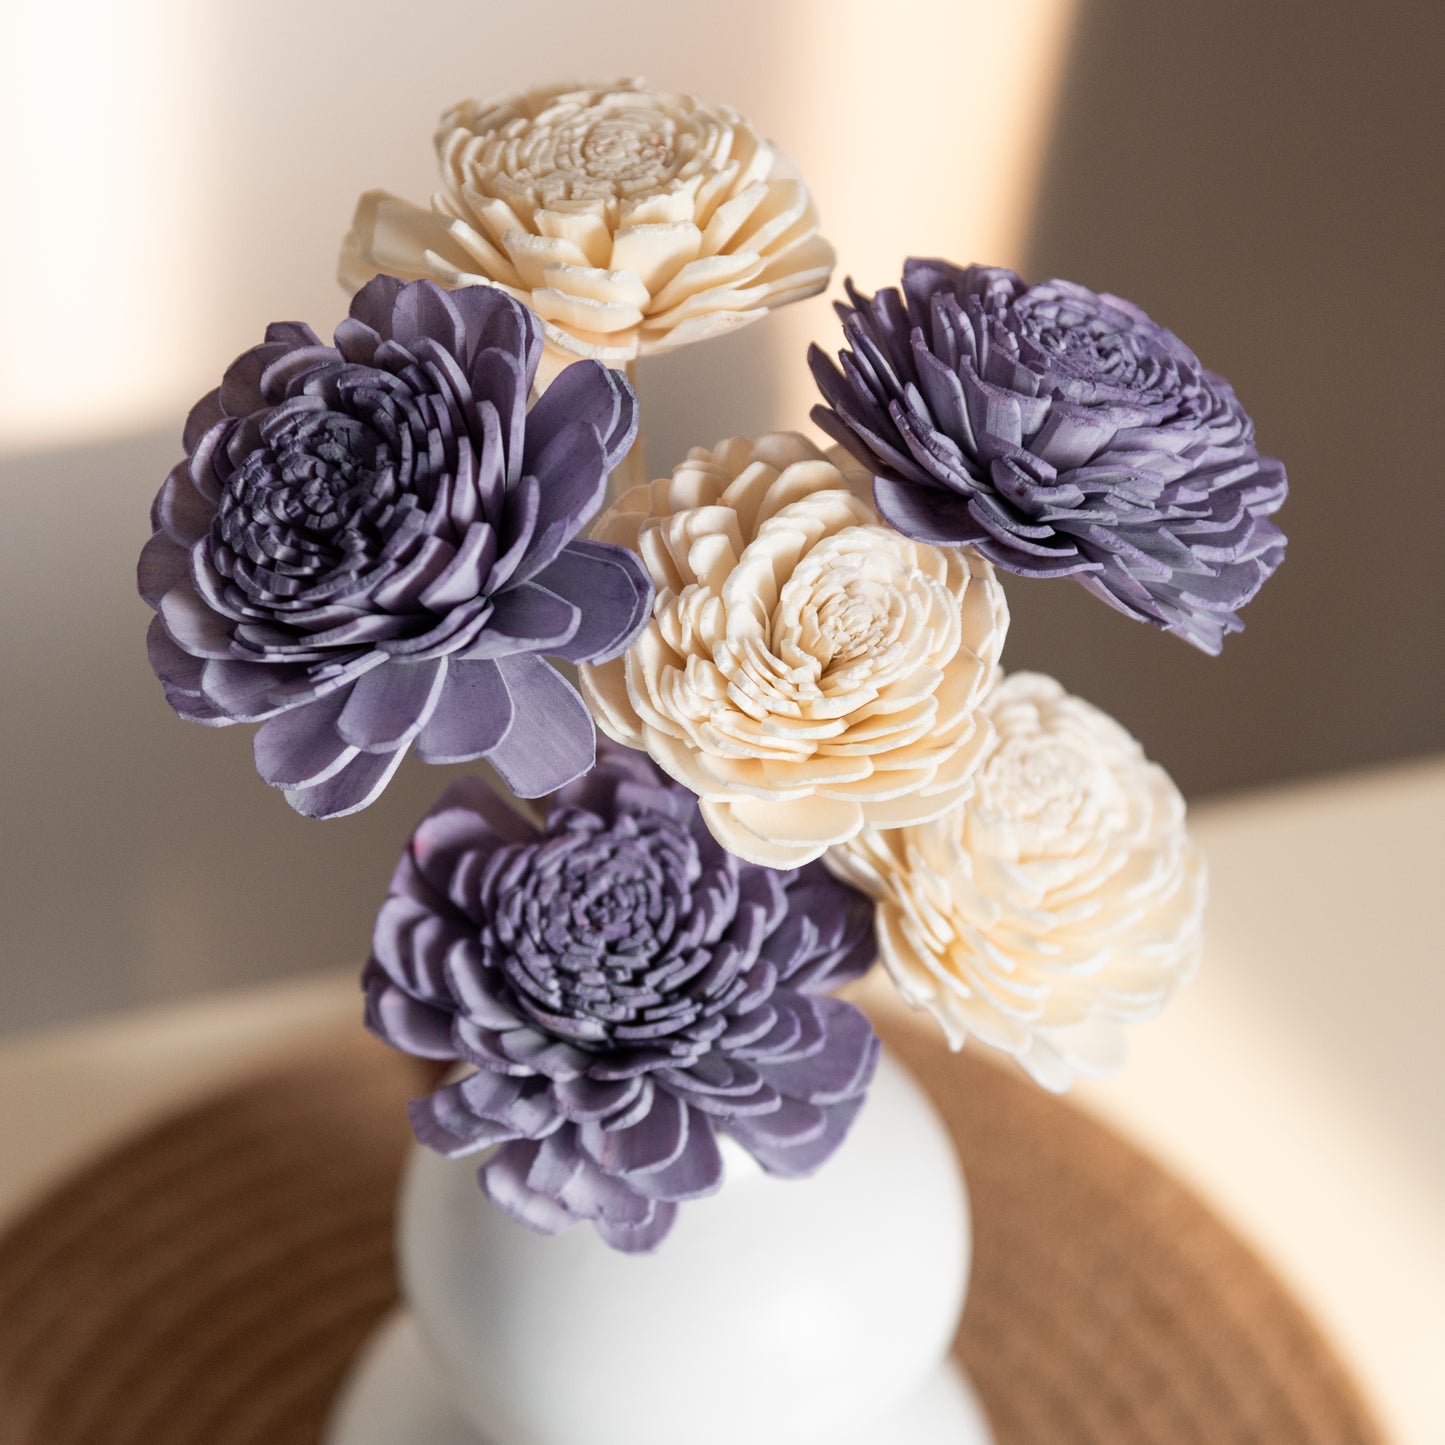 Lavender and White Sola Flowers In a Double Layered Orb Vase